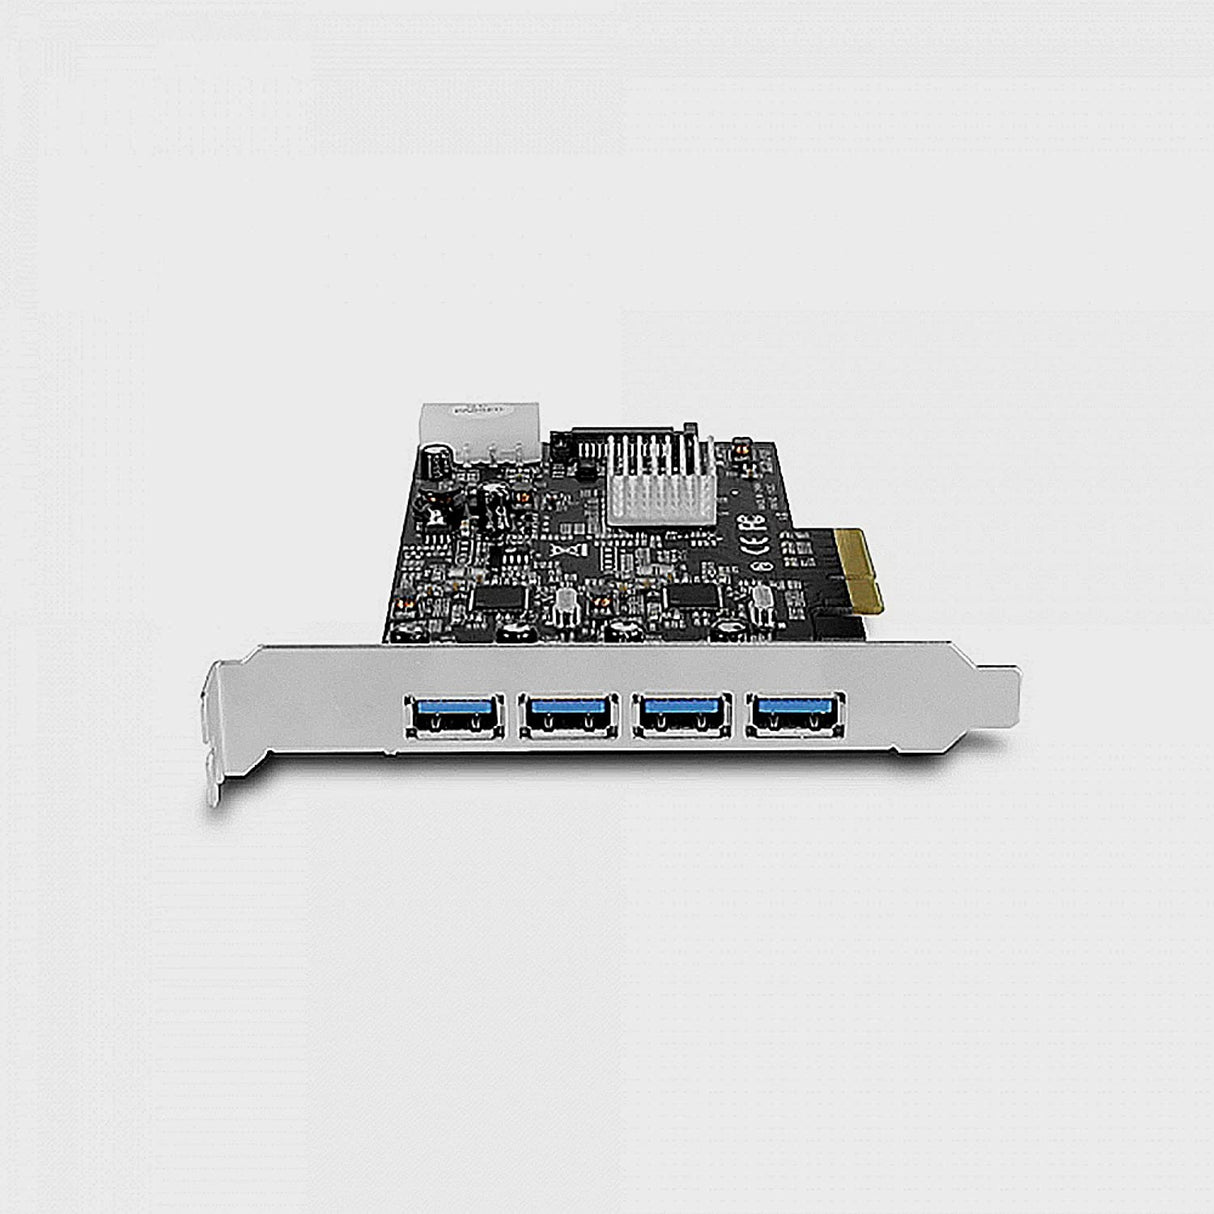 Vantec 4-Port Dedicated 10Gbps USB 3.1 Gen 2 PCIe Host Card with Dual Controller for PCIe x4/x8/x16 Slot Black/Silver Black/Silver (UGT-PCE470-2C)